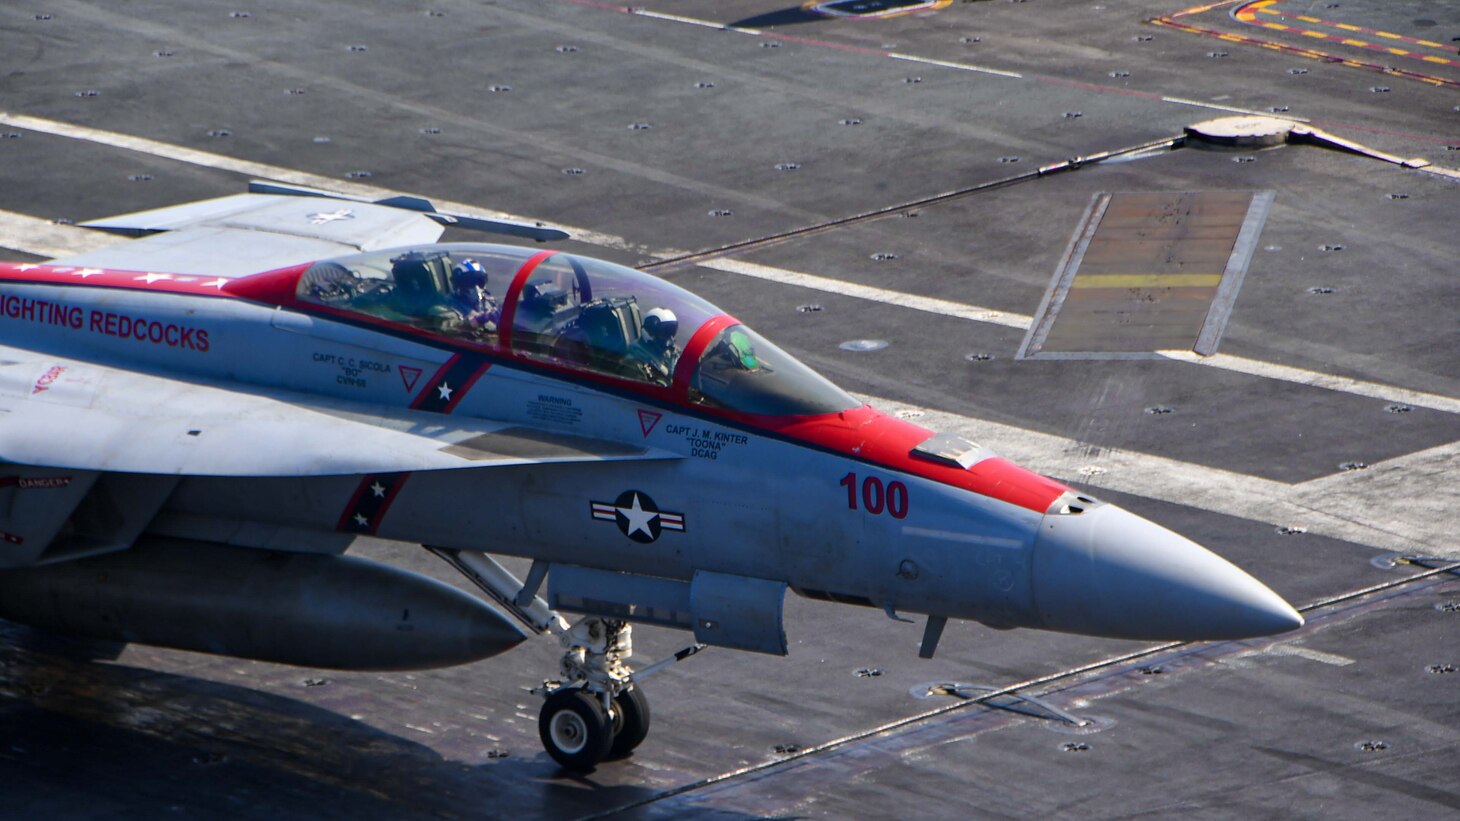 U.S. Navy Capt. Craig Sicola, commanding officer of the aircraft carrier USS Nimitz (CVN 68), front seat, and Cmdr. Luke Edwards, commanding officer of the “Fighting Redcocks” of Strike Fighter Squadron (VFA) 22, taxi across the flight deck of Nimitz in an F/A-18F Super Hornet from VFA-22. Nimitz is in U.S. 7th Fleet conducting routine operations. 7th Fleet is the U.S. Navy's largest forward-deployed numbered fleet, and routinely interacts and operates with allies and partners in preserving a free and open Indo-Pacific region. (U.S. Navy photo by Mass Communication Specialist 3rd Class Emma Burgess)